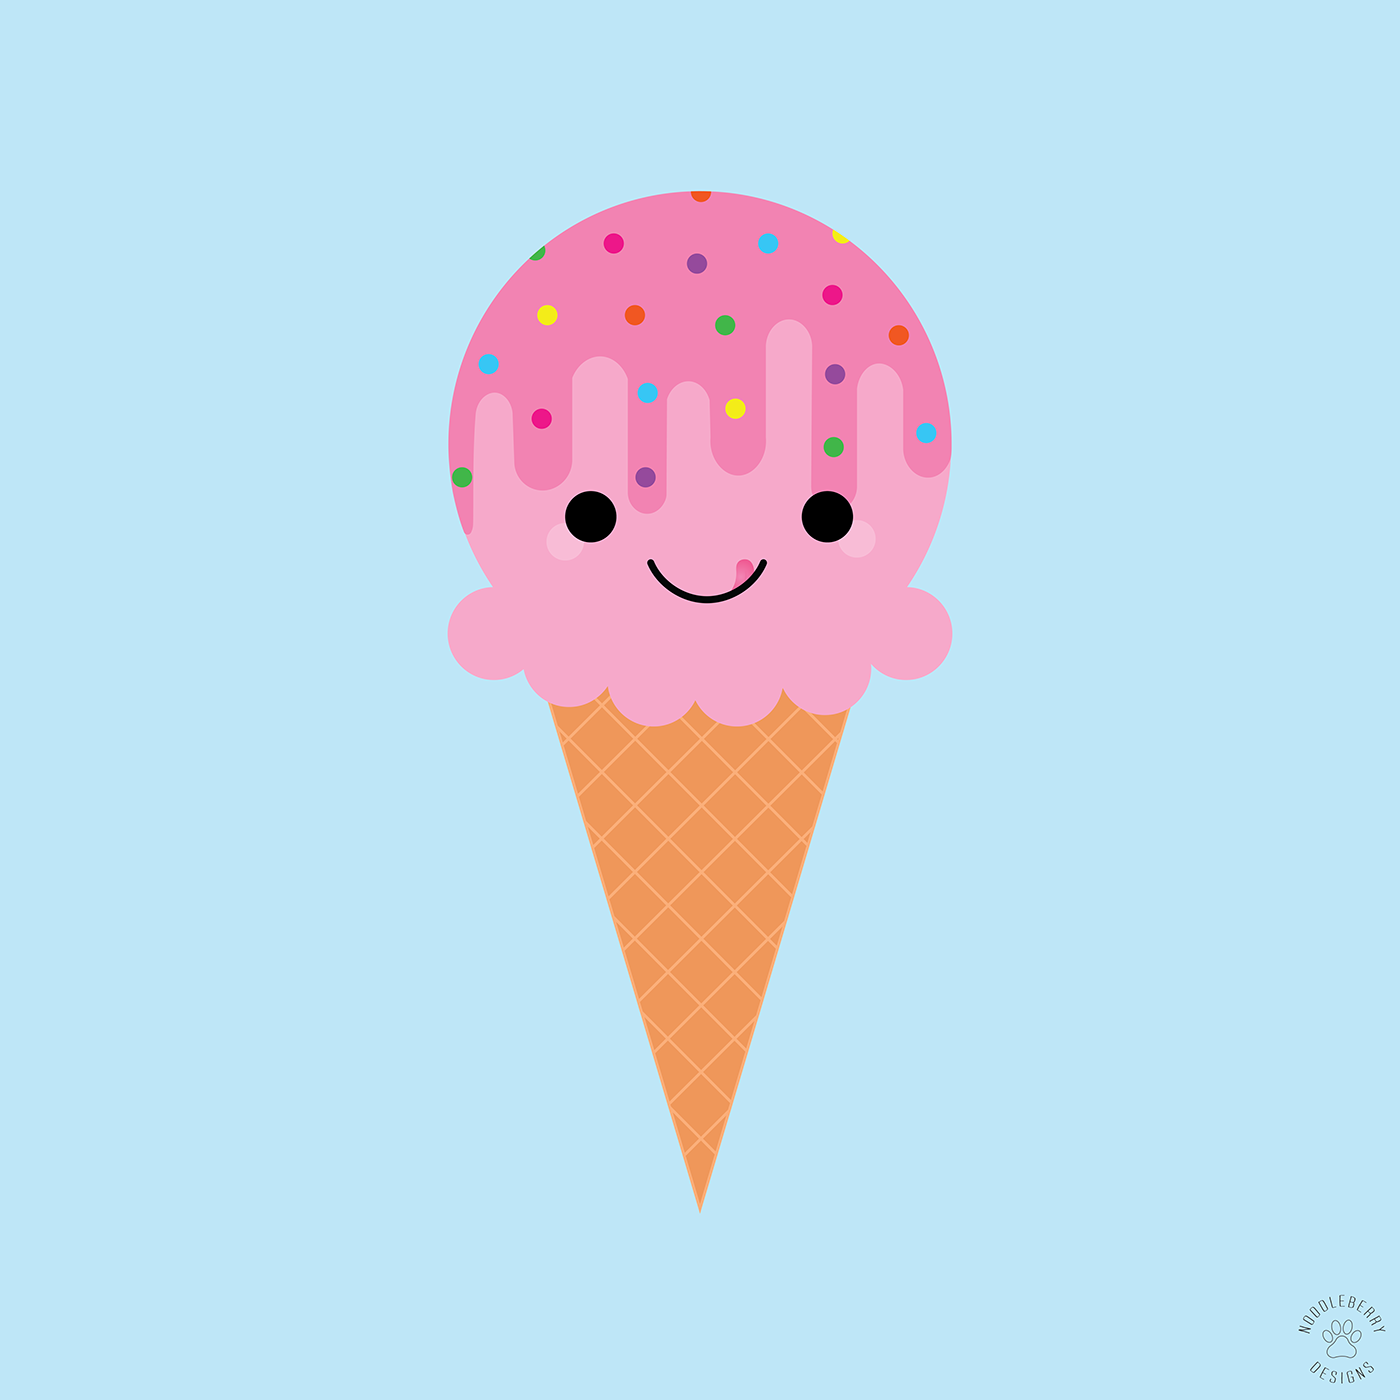 Happy Strawberry Ice Cream Cone with Rainbow Sprinkles Kawaii Illustration by NoodleBerry Designs